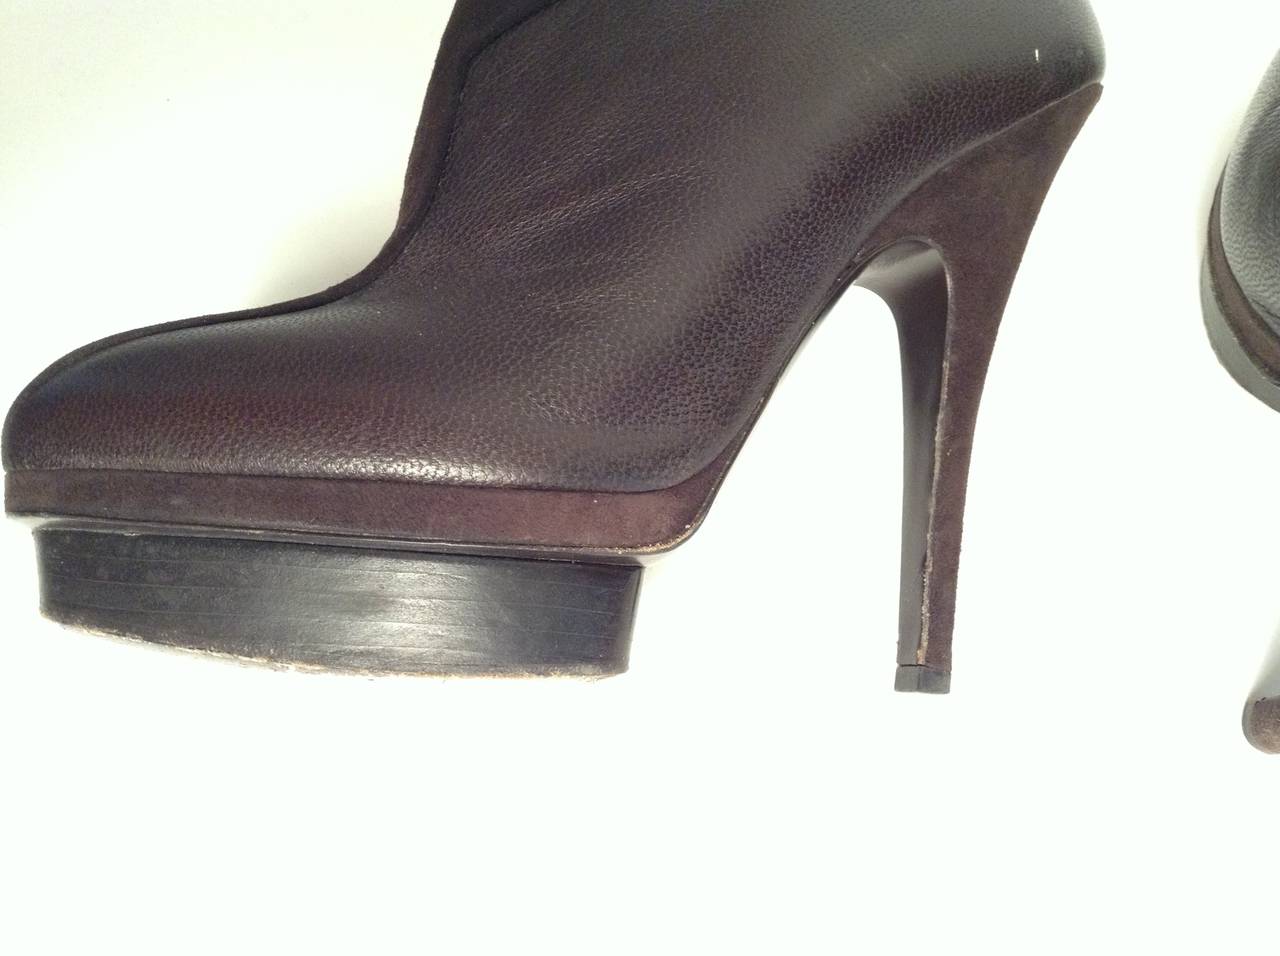 Yves Saint Laurent Brown Leather Booties Size 39.5/9 For Sale 3